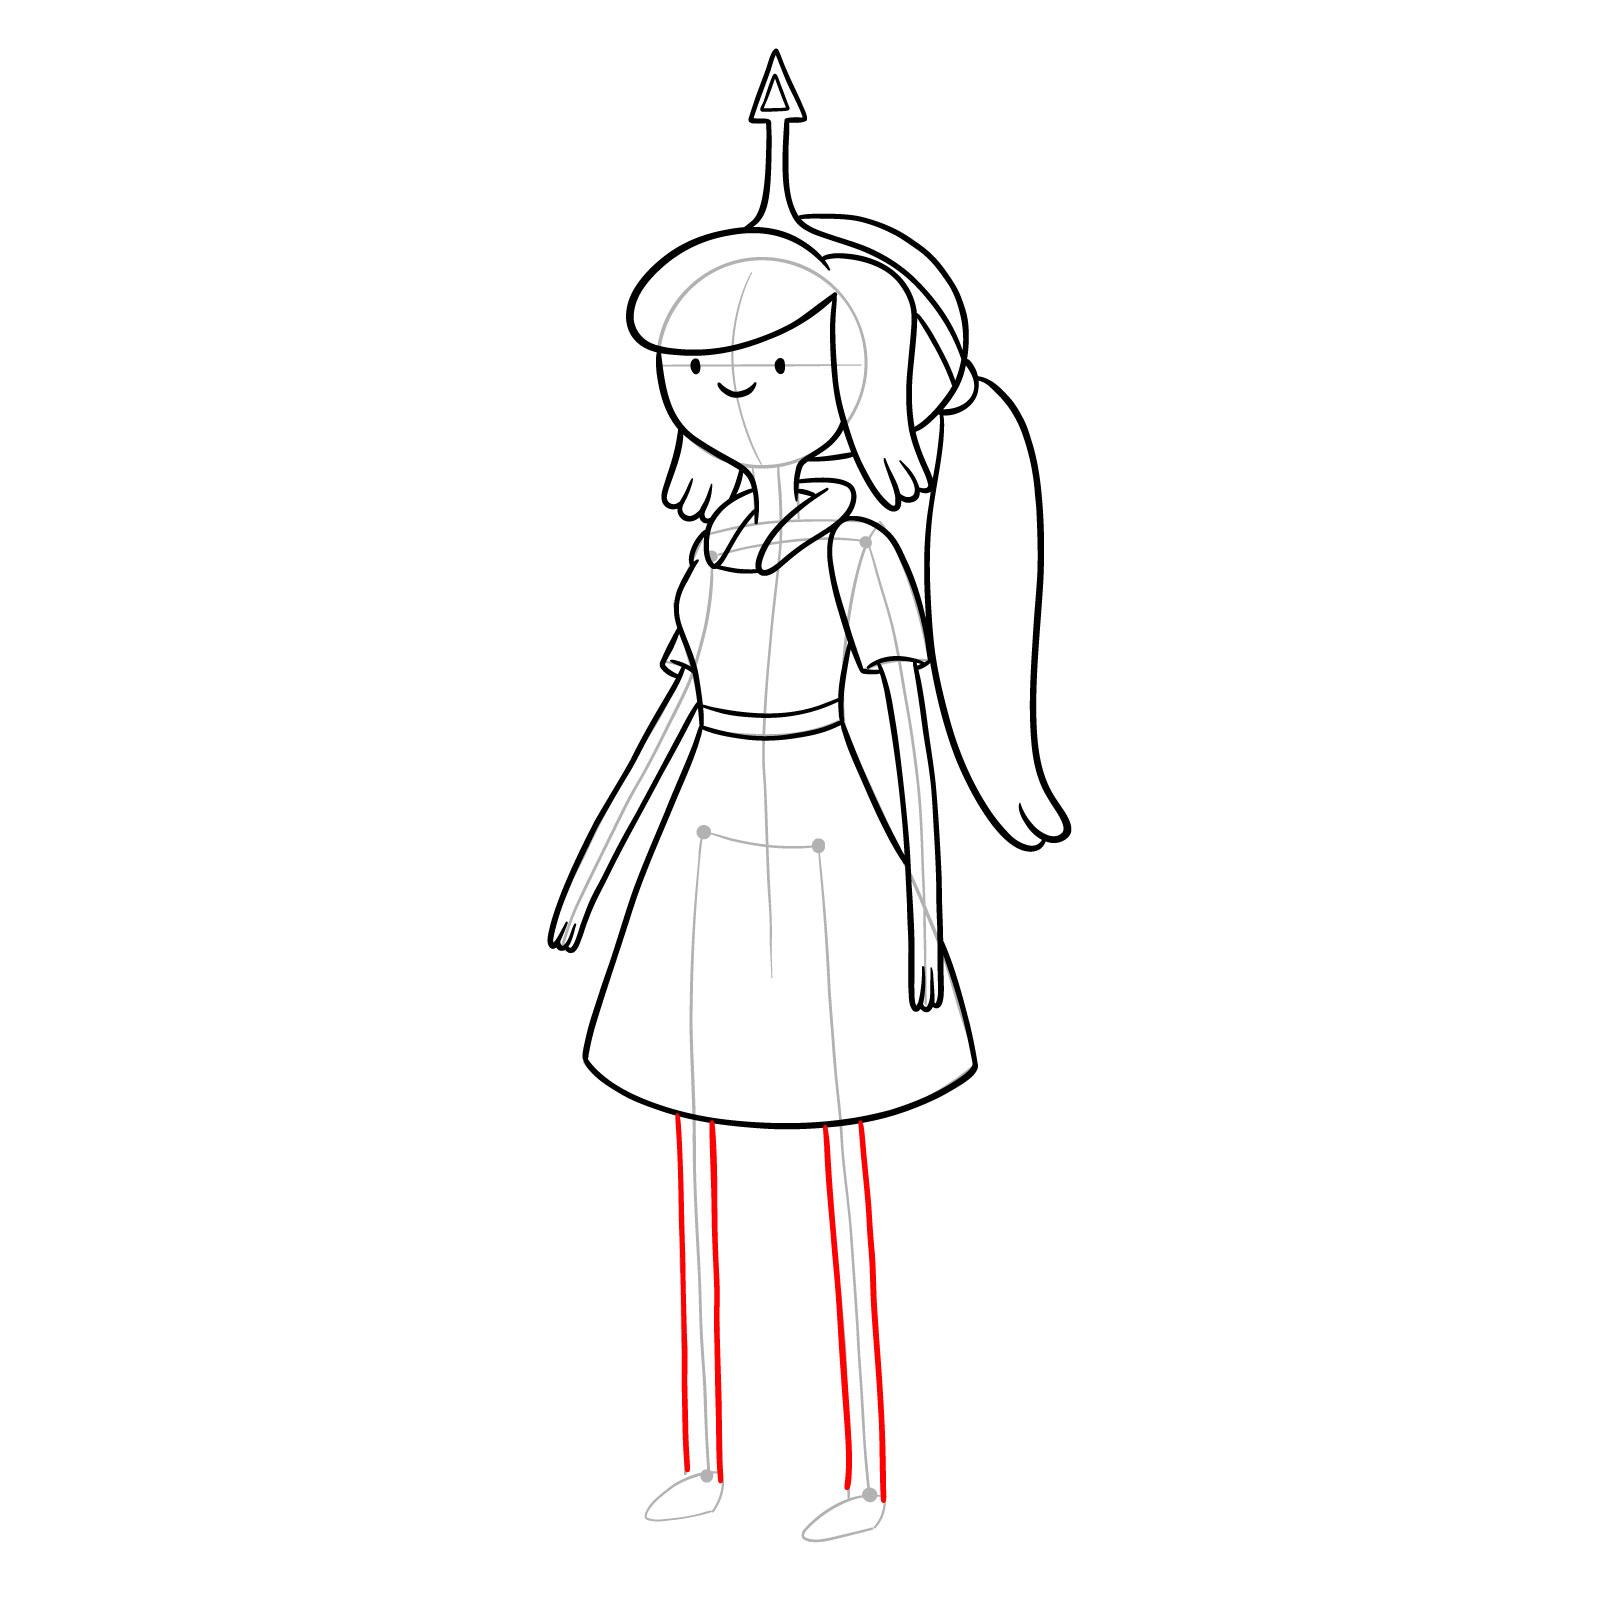 How to draw Princess Chewypaste from Adventure Time - step 20